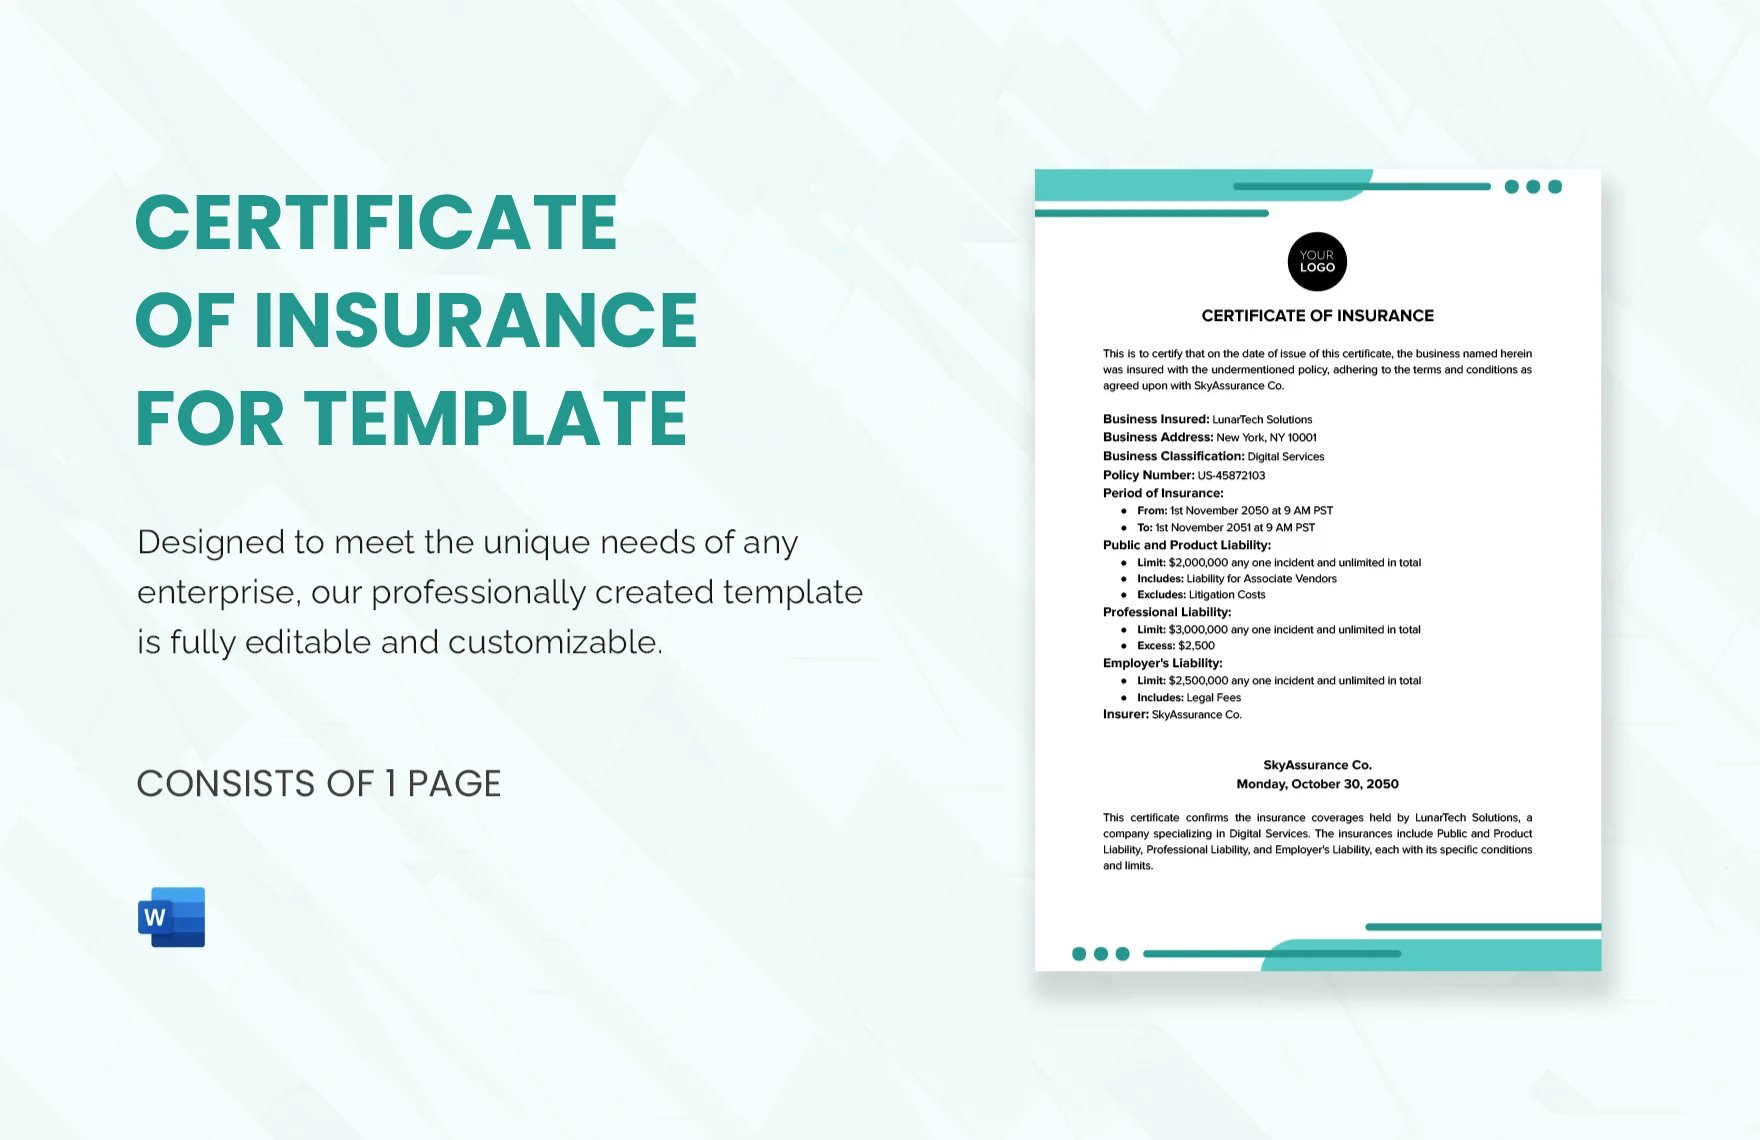 Certificate of Insurance for Business Template in Word